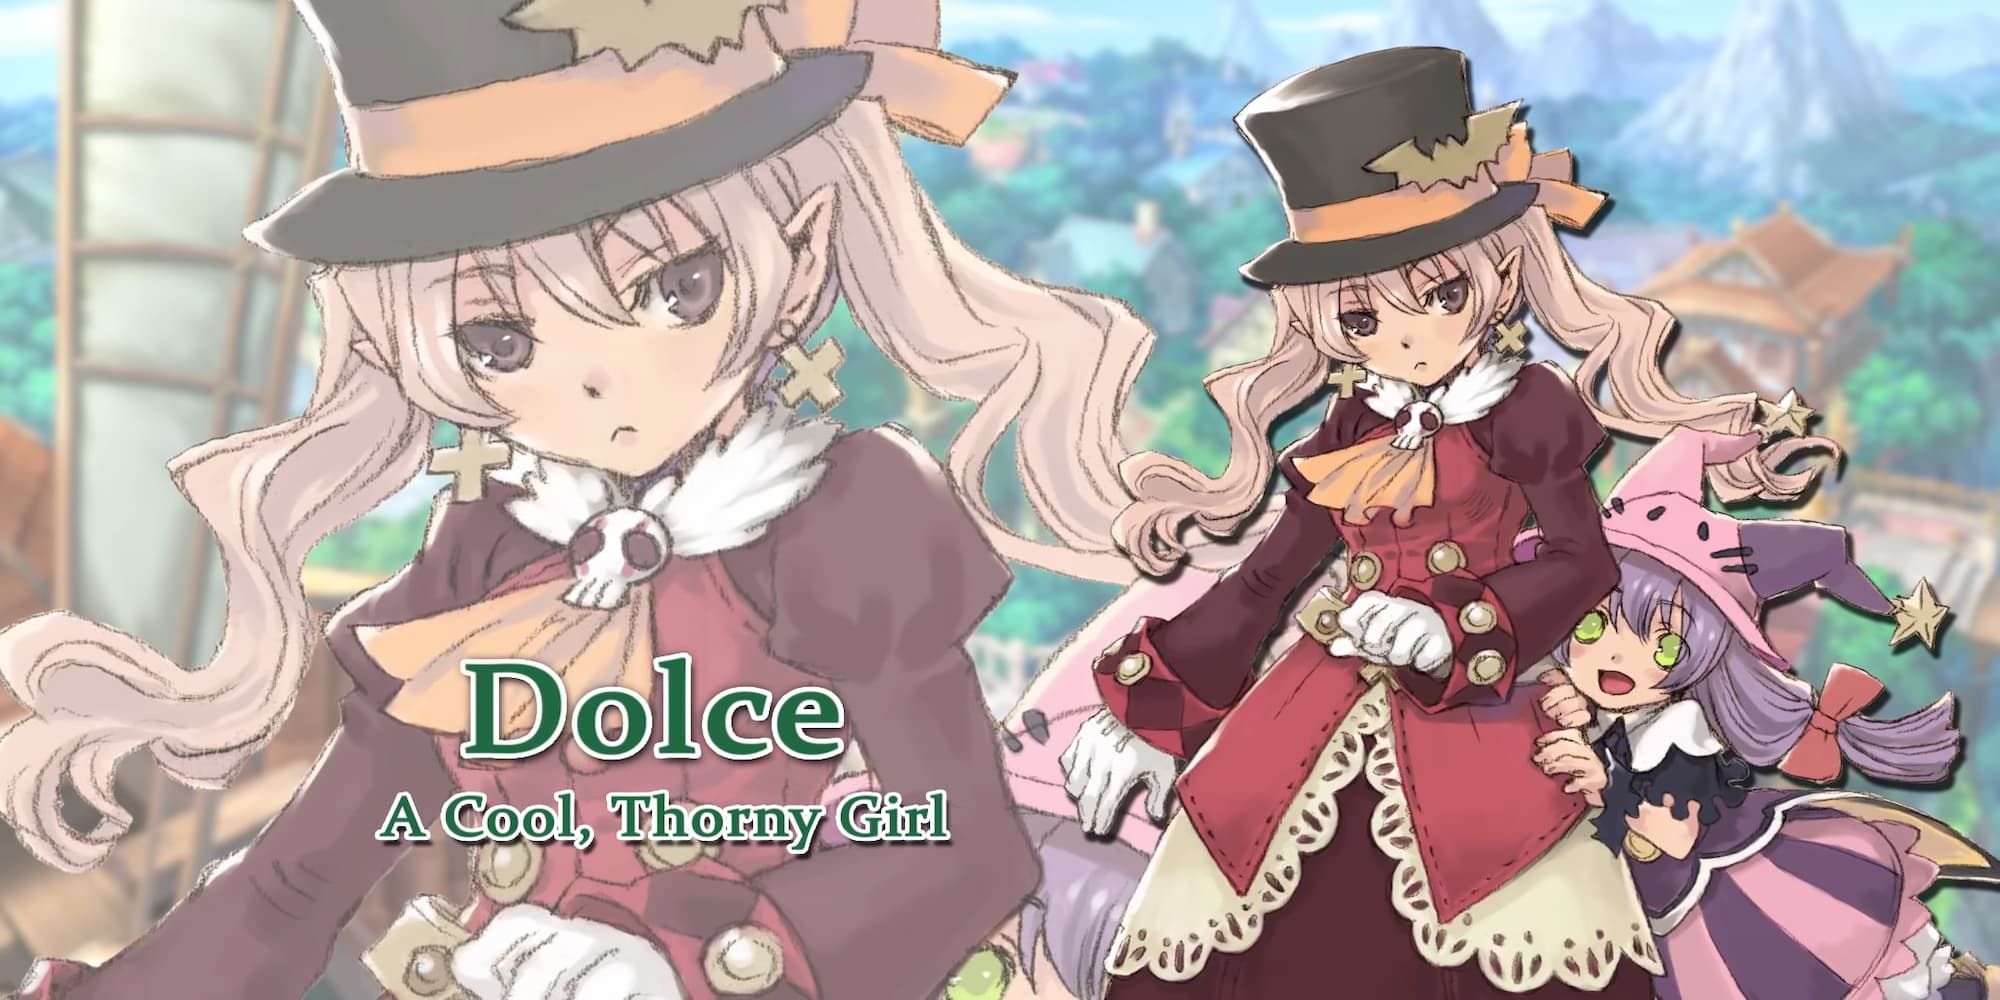 rune factory 4 dolce